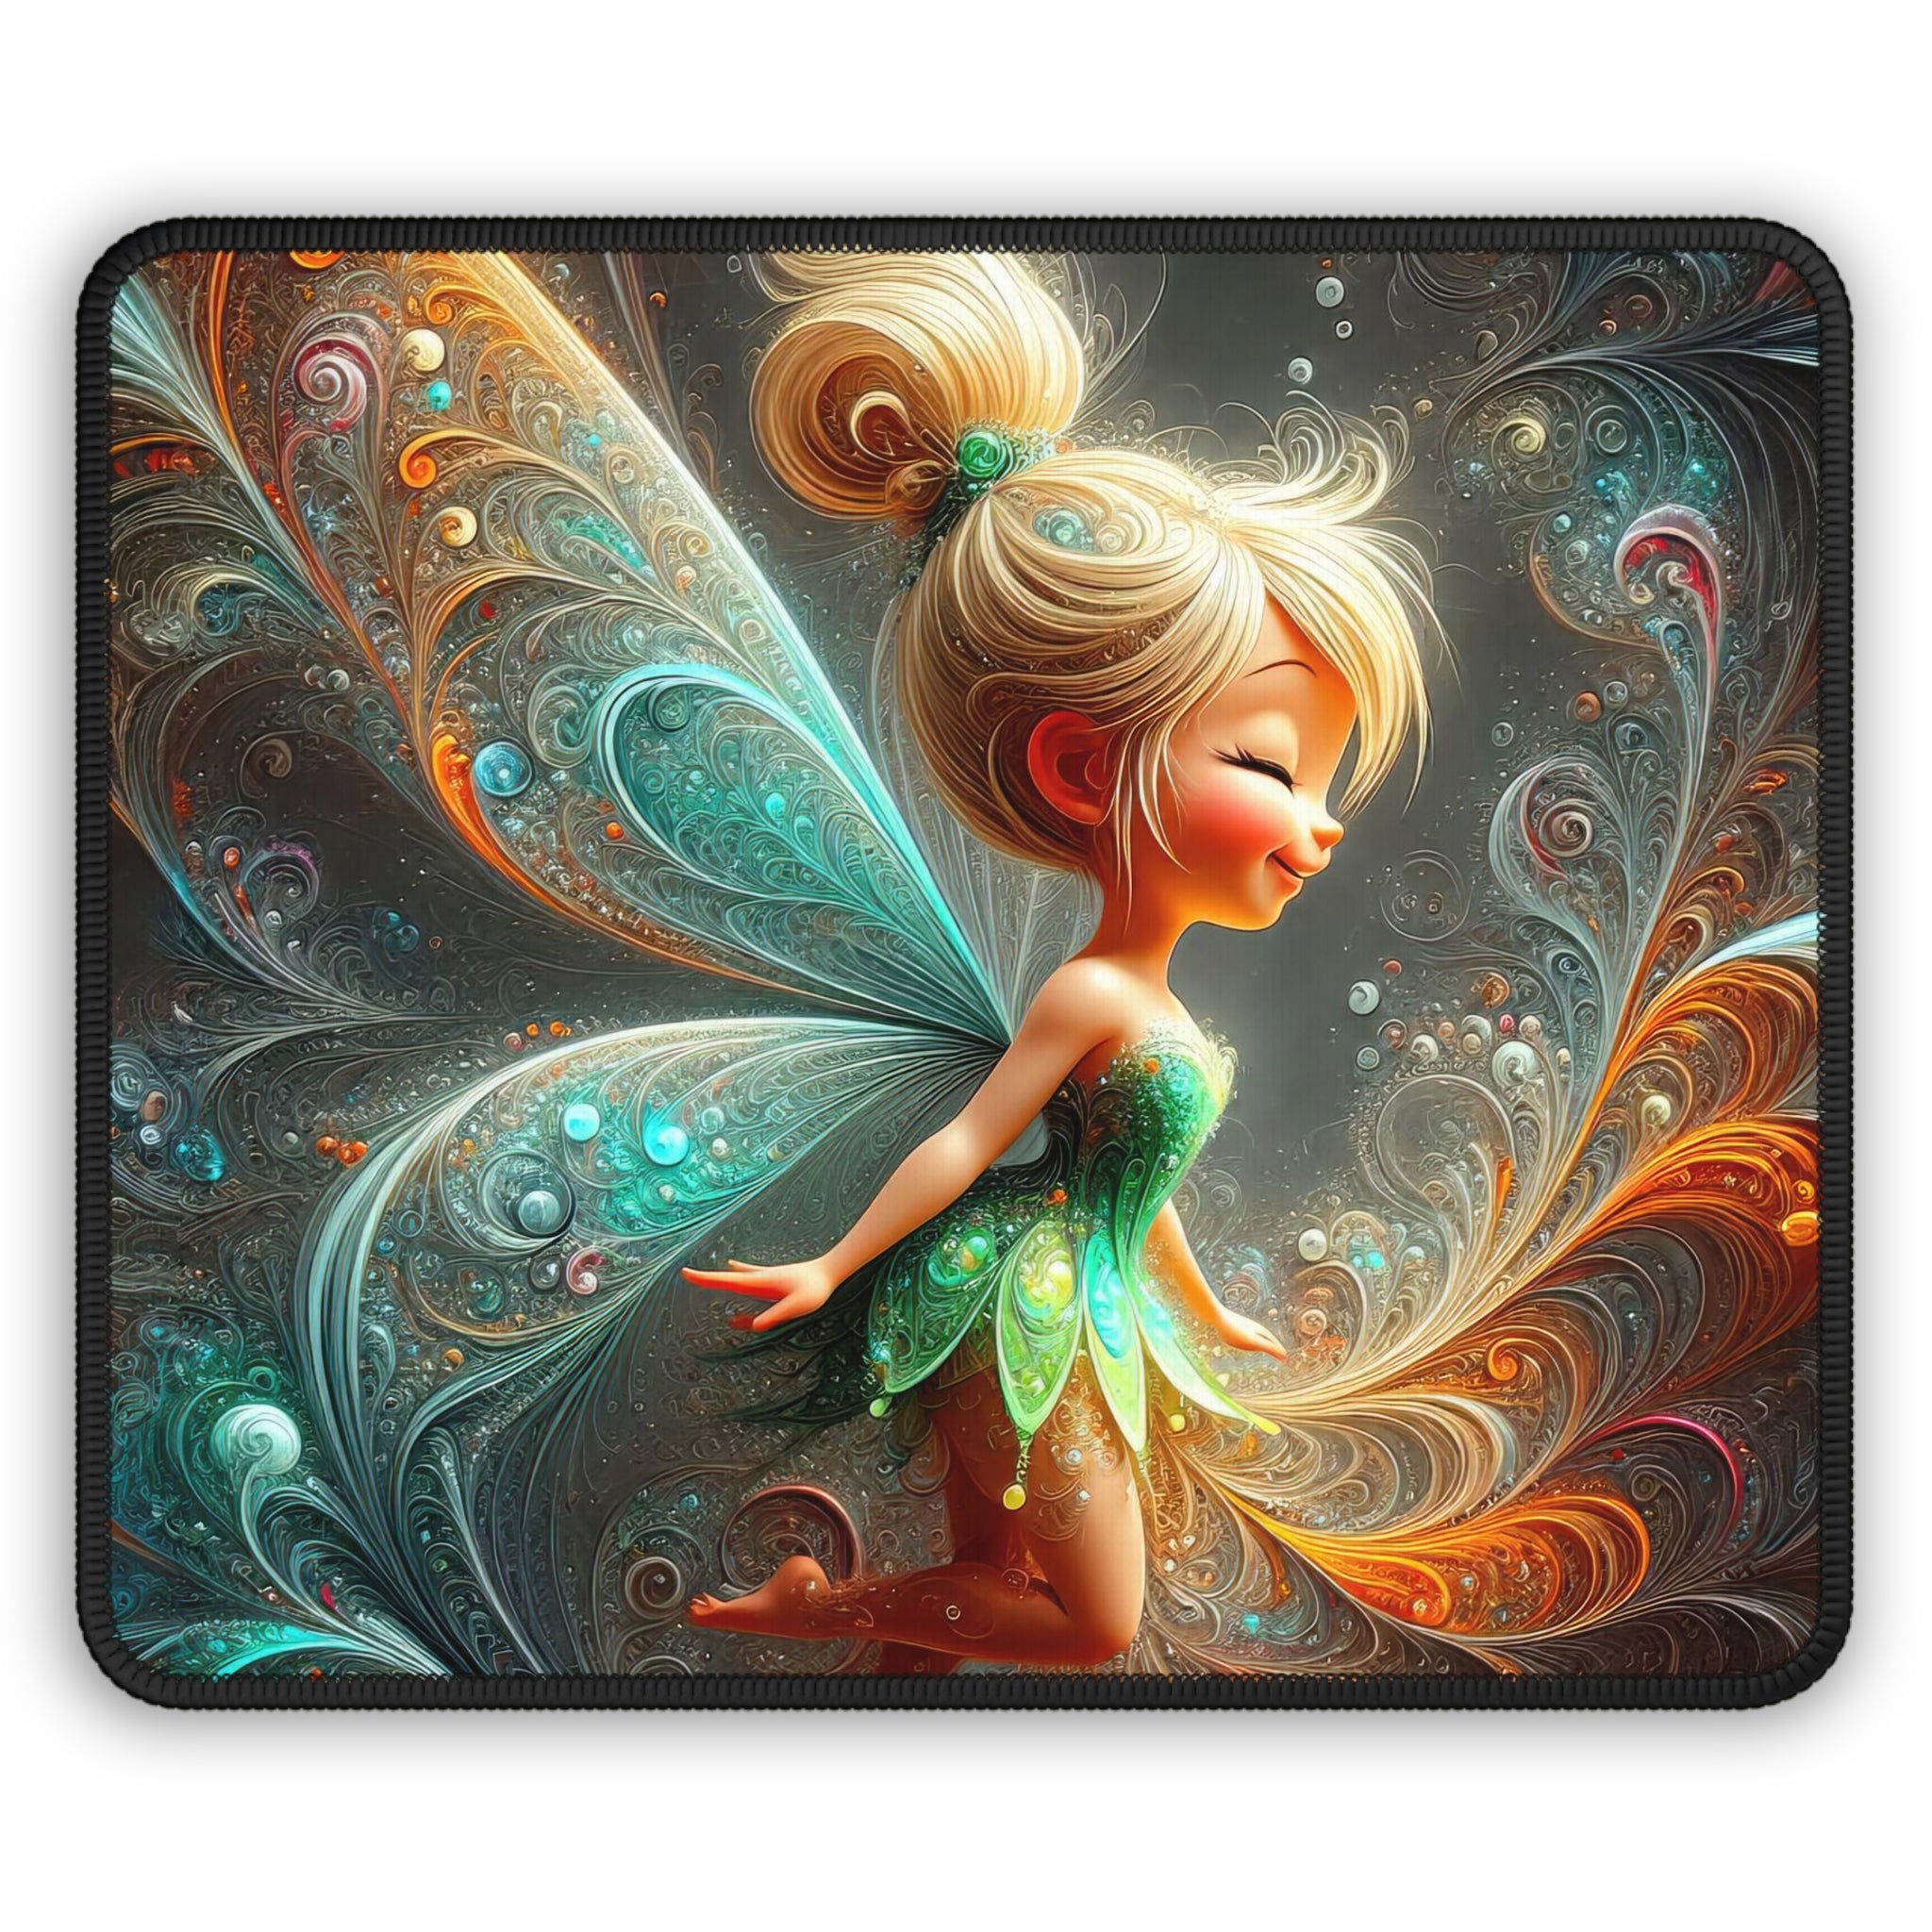 The Fairy's Dream Mouse Pad